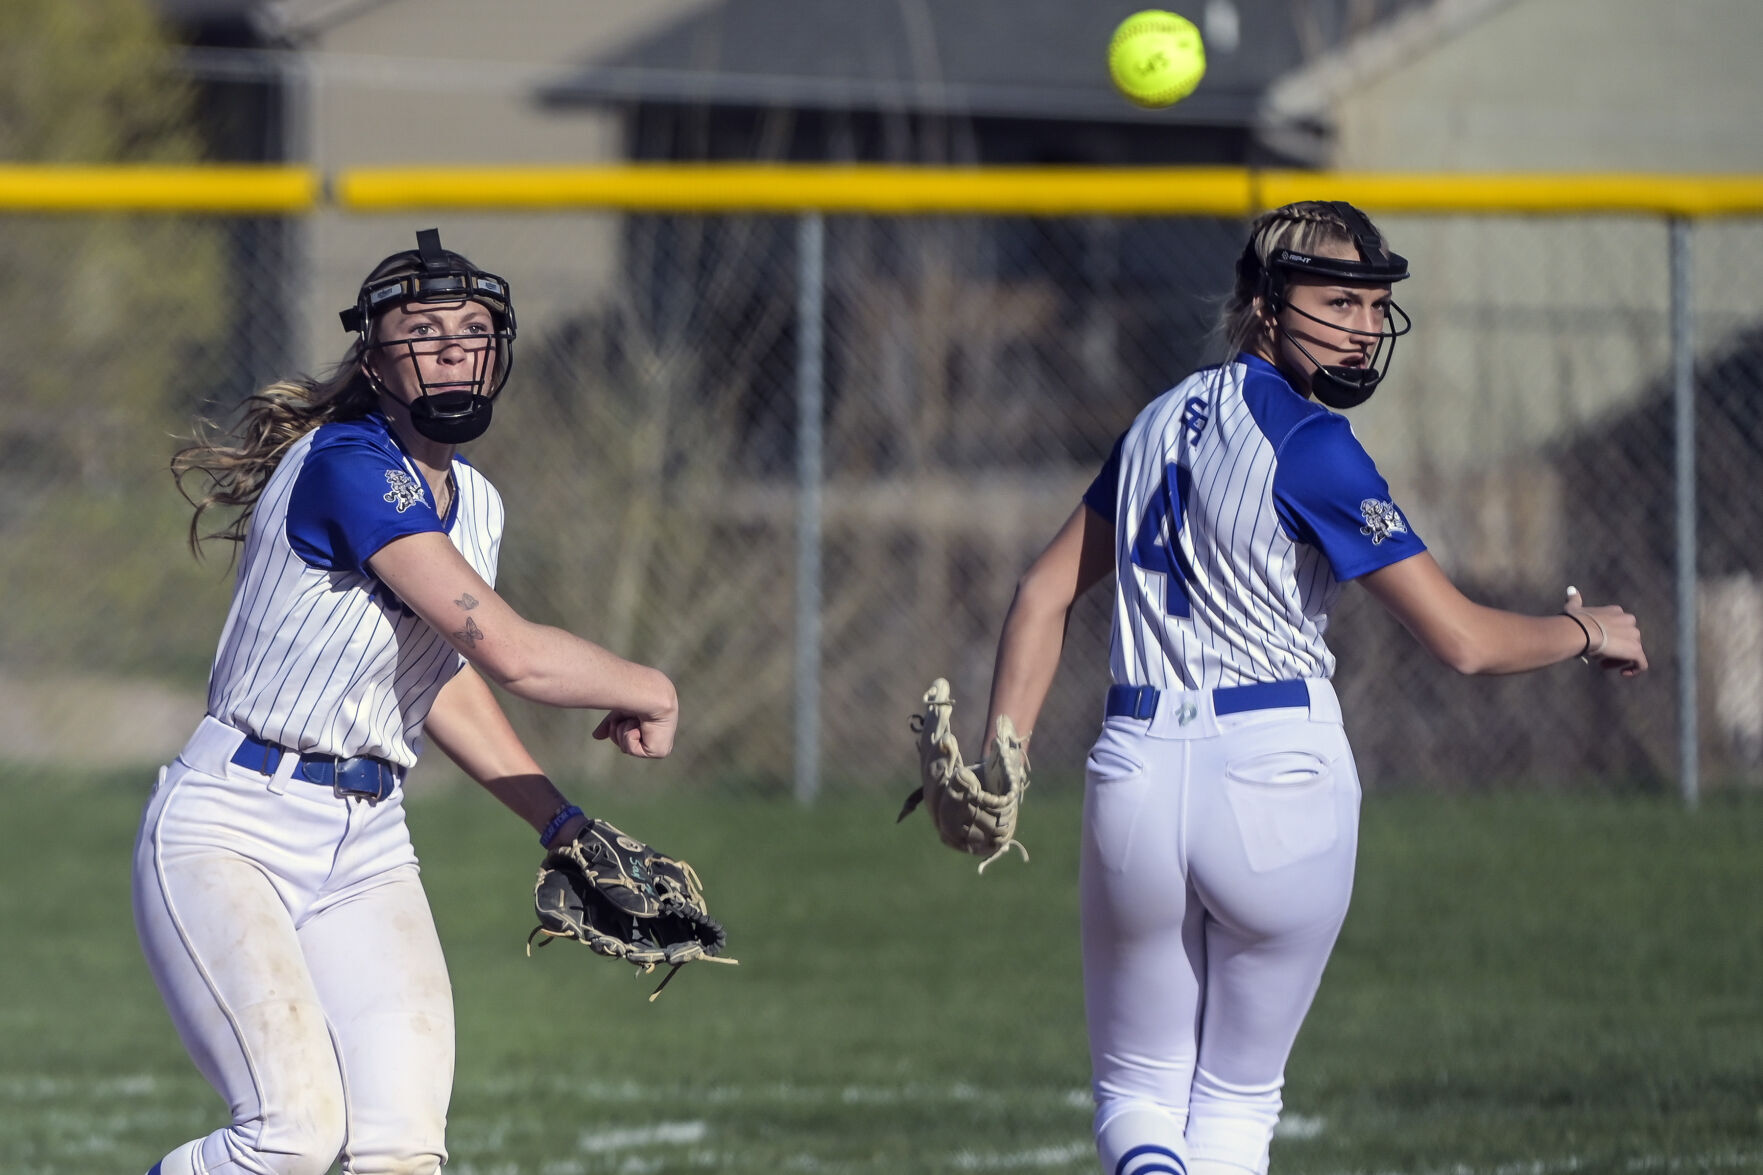 Rapid City Stevens outplays Cobblers with Addie Hock’s dominant doubles performance